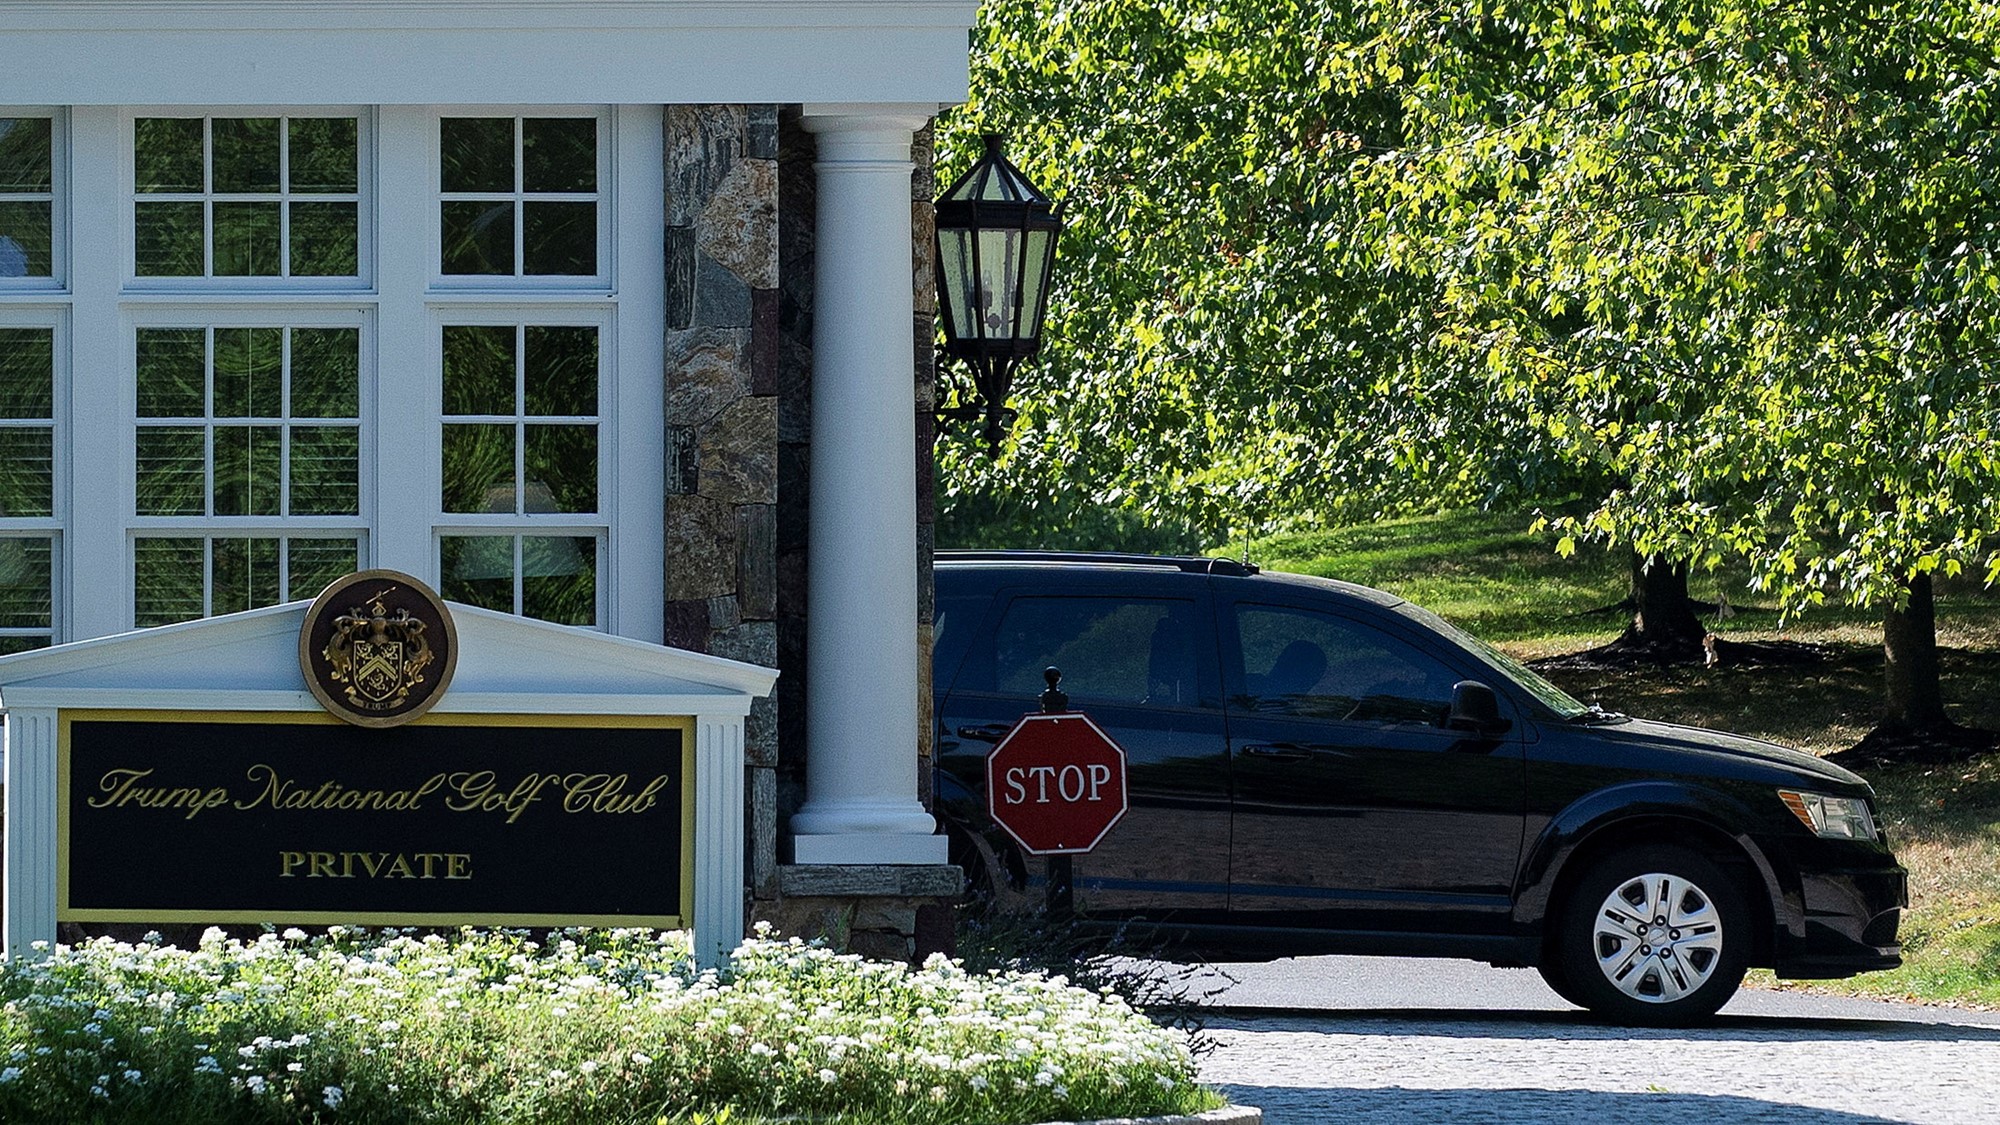 A view outside the Trump National Golf Club in Bedminster, New Jersey.